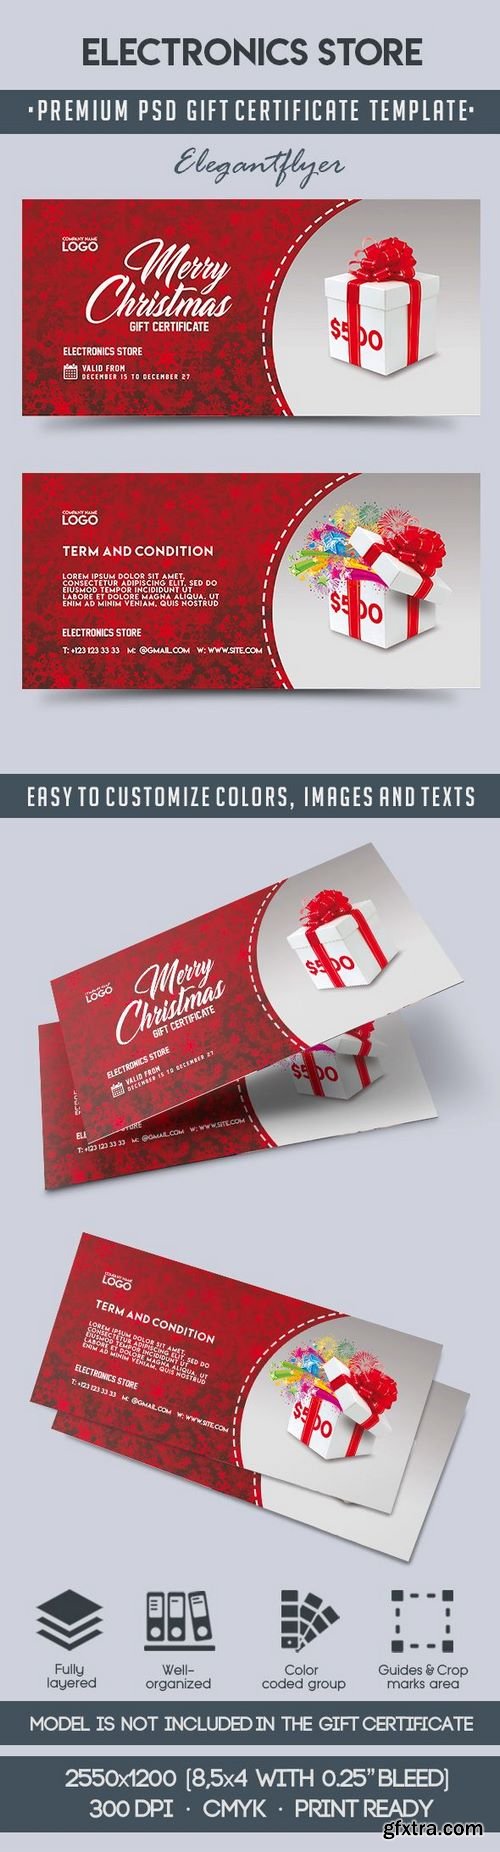 Electronics Store – Premium Gift Certificate PSD Template